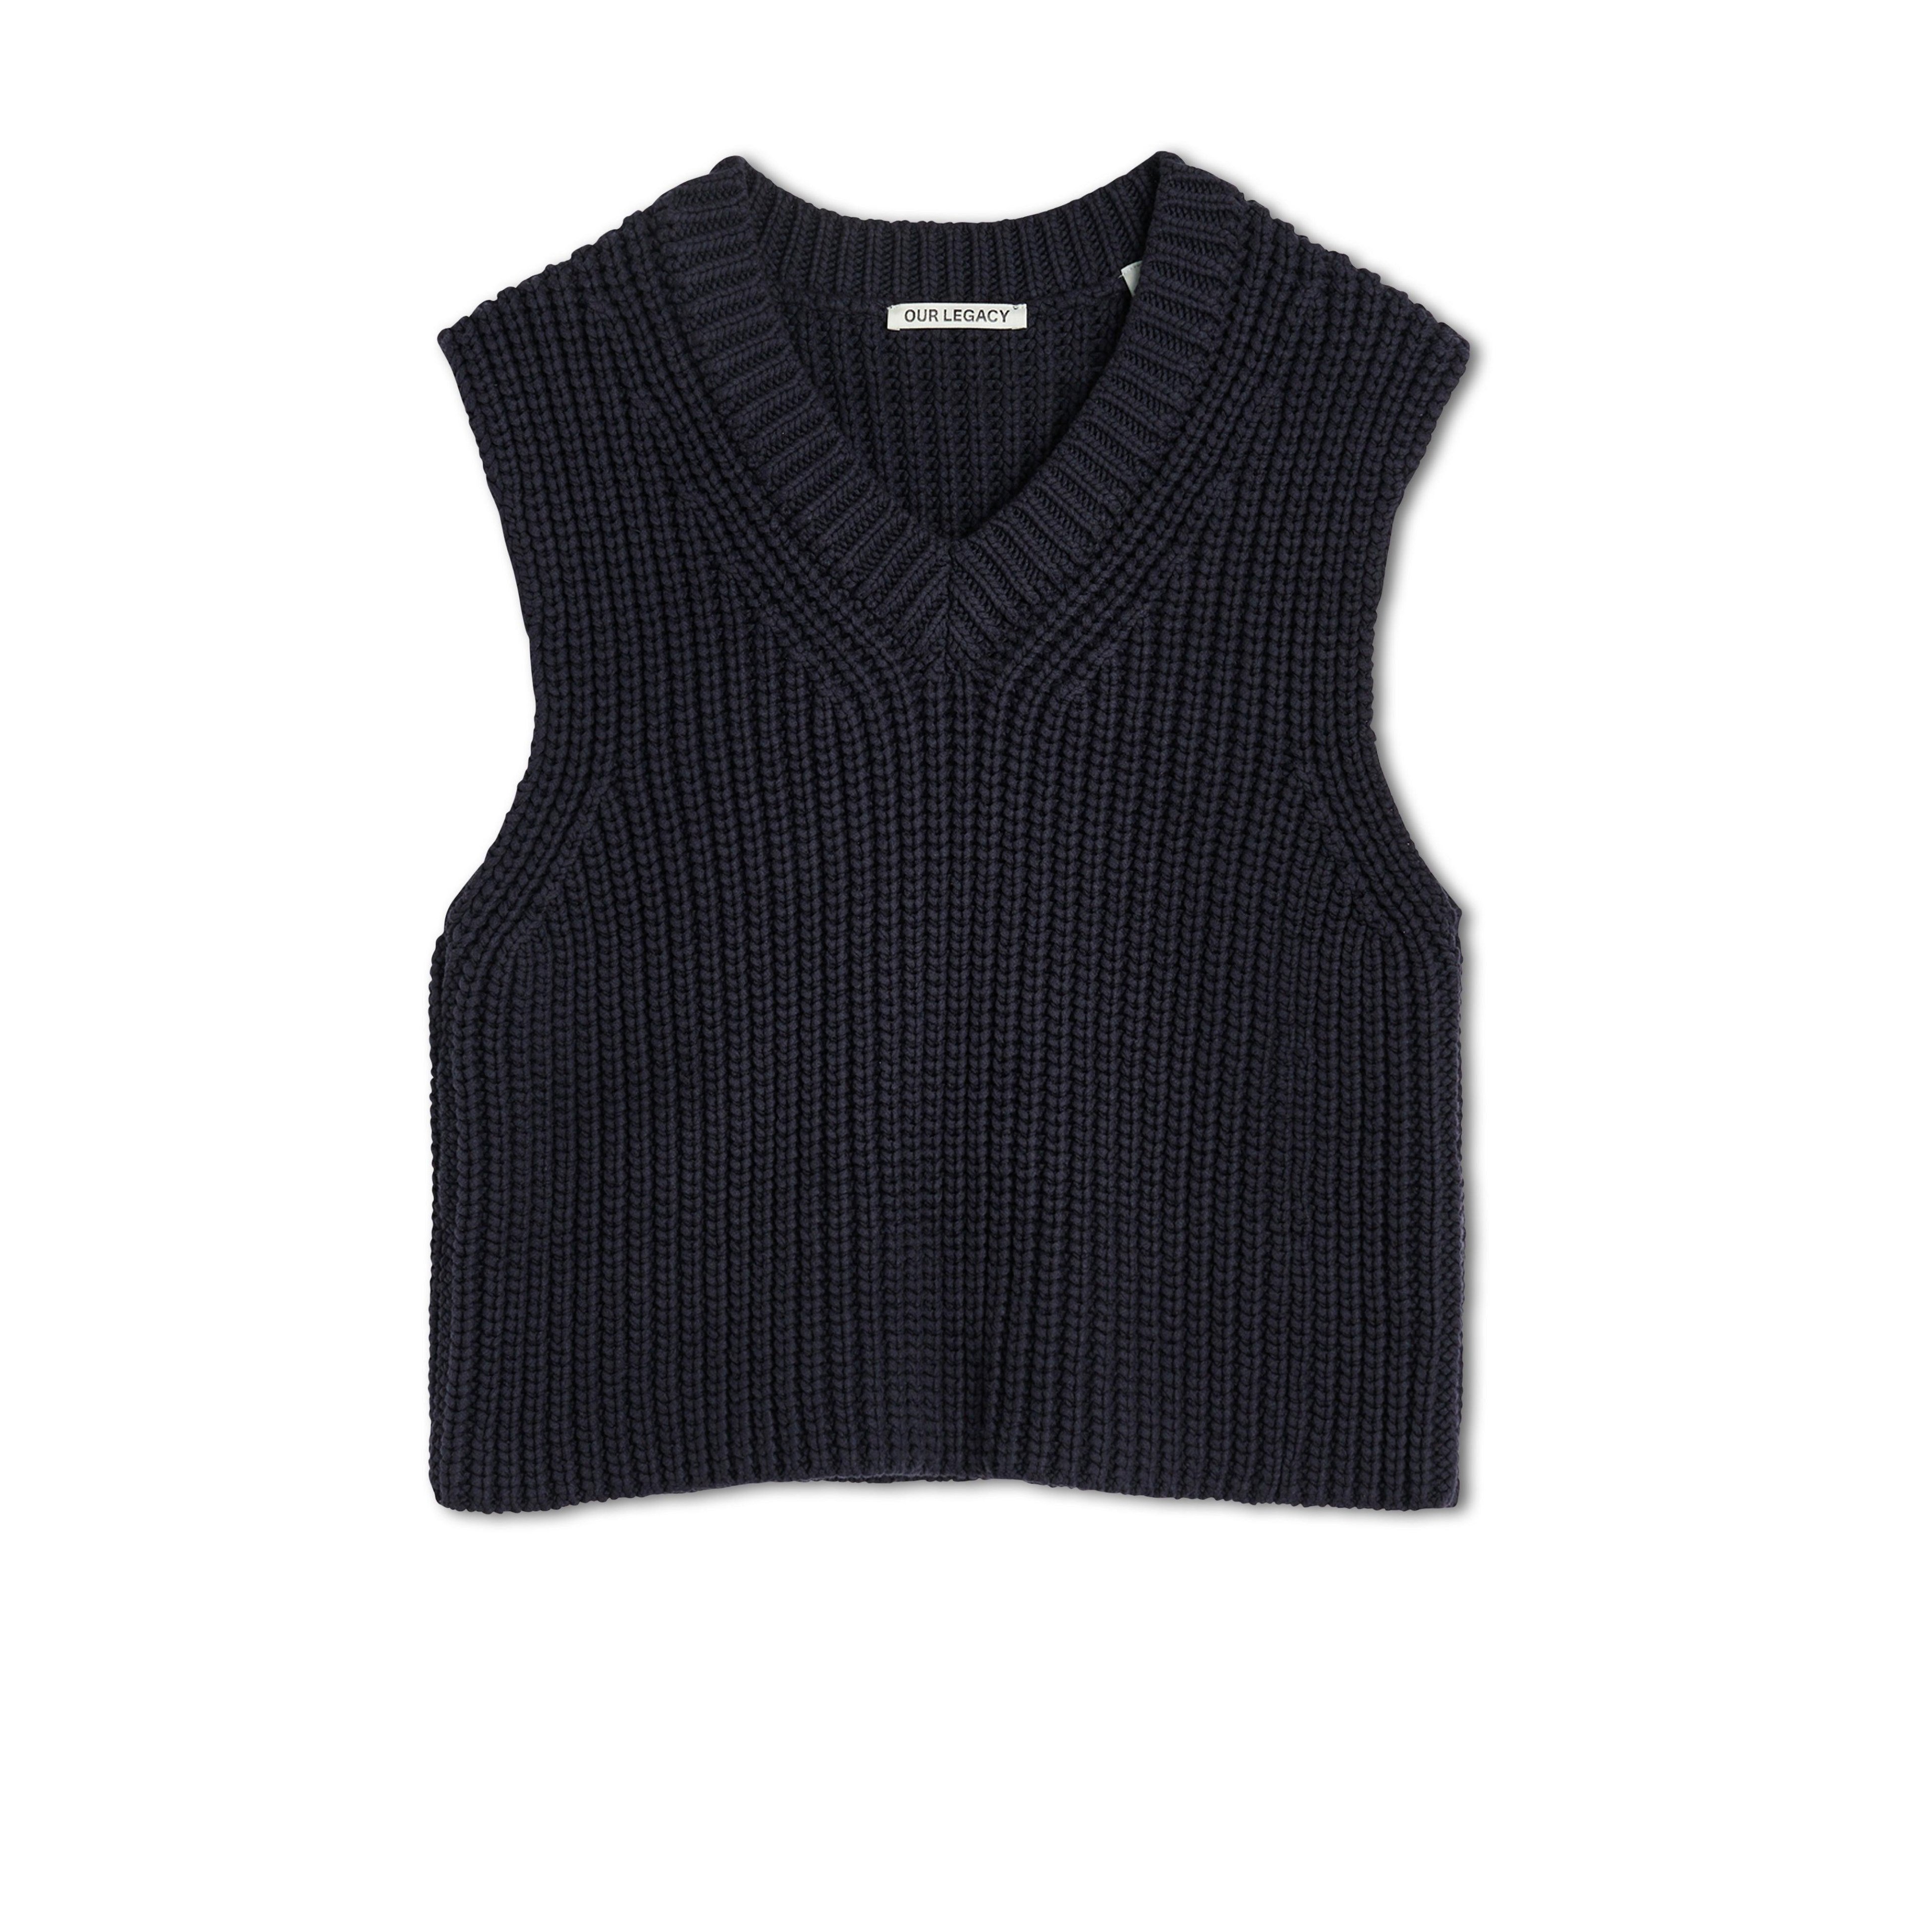 Our Legacy - Men's Intact Vest - (Navy) by OUR LEGACY